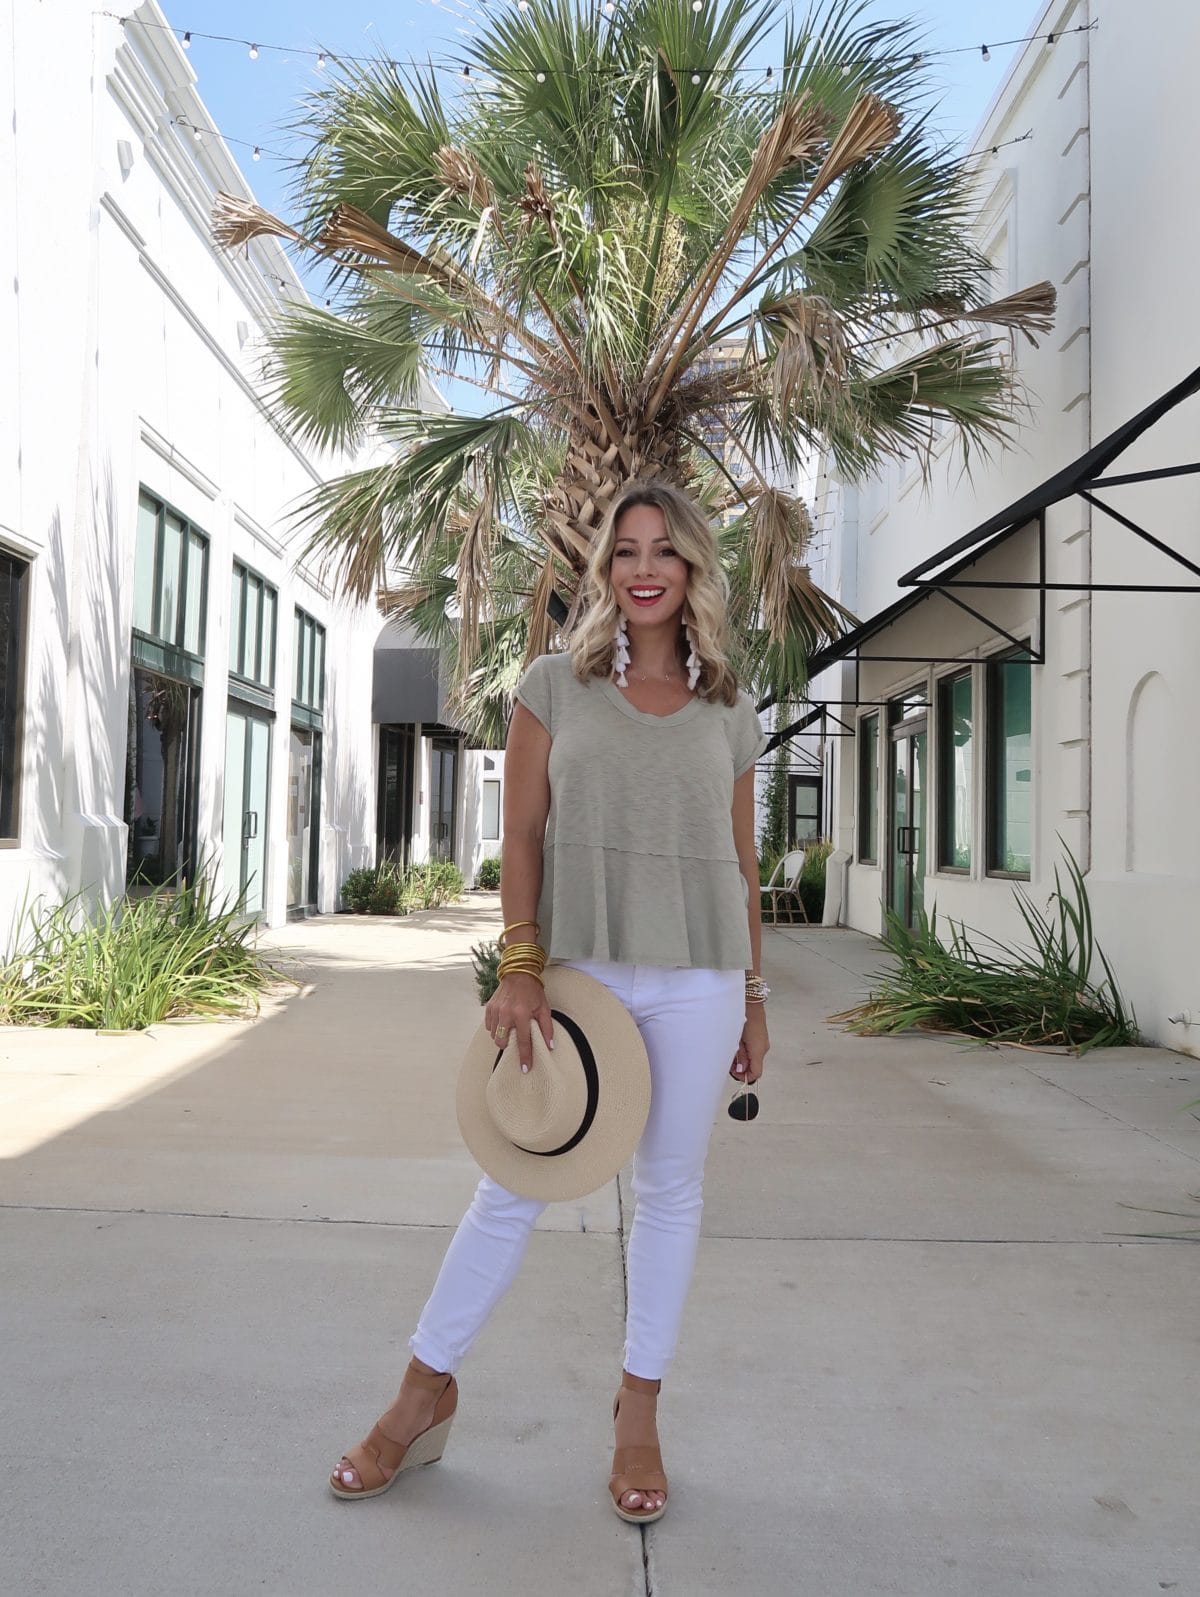 Flirty Summer Styles & Date Night Dresses, Tee, White Jeans, Wedges, Hat